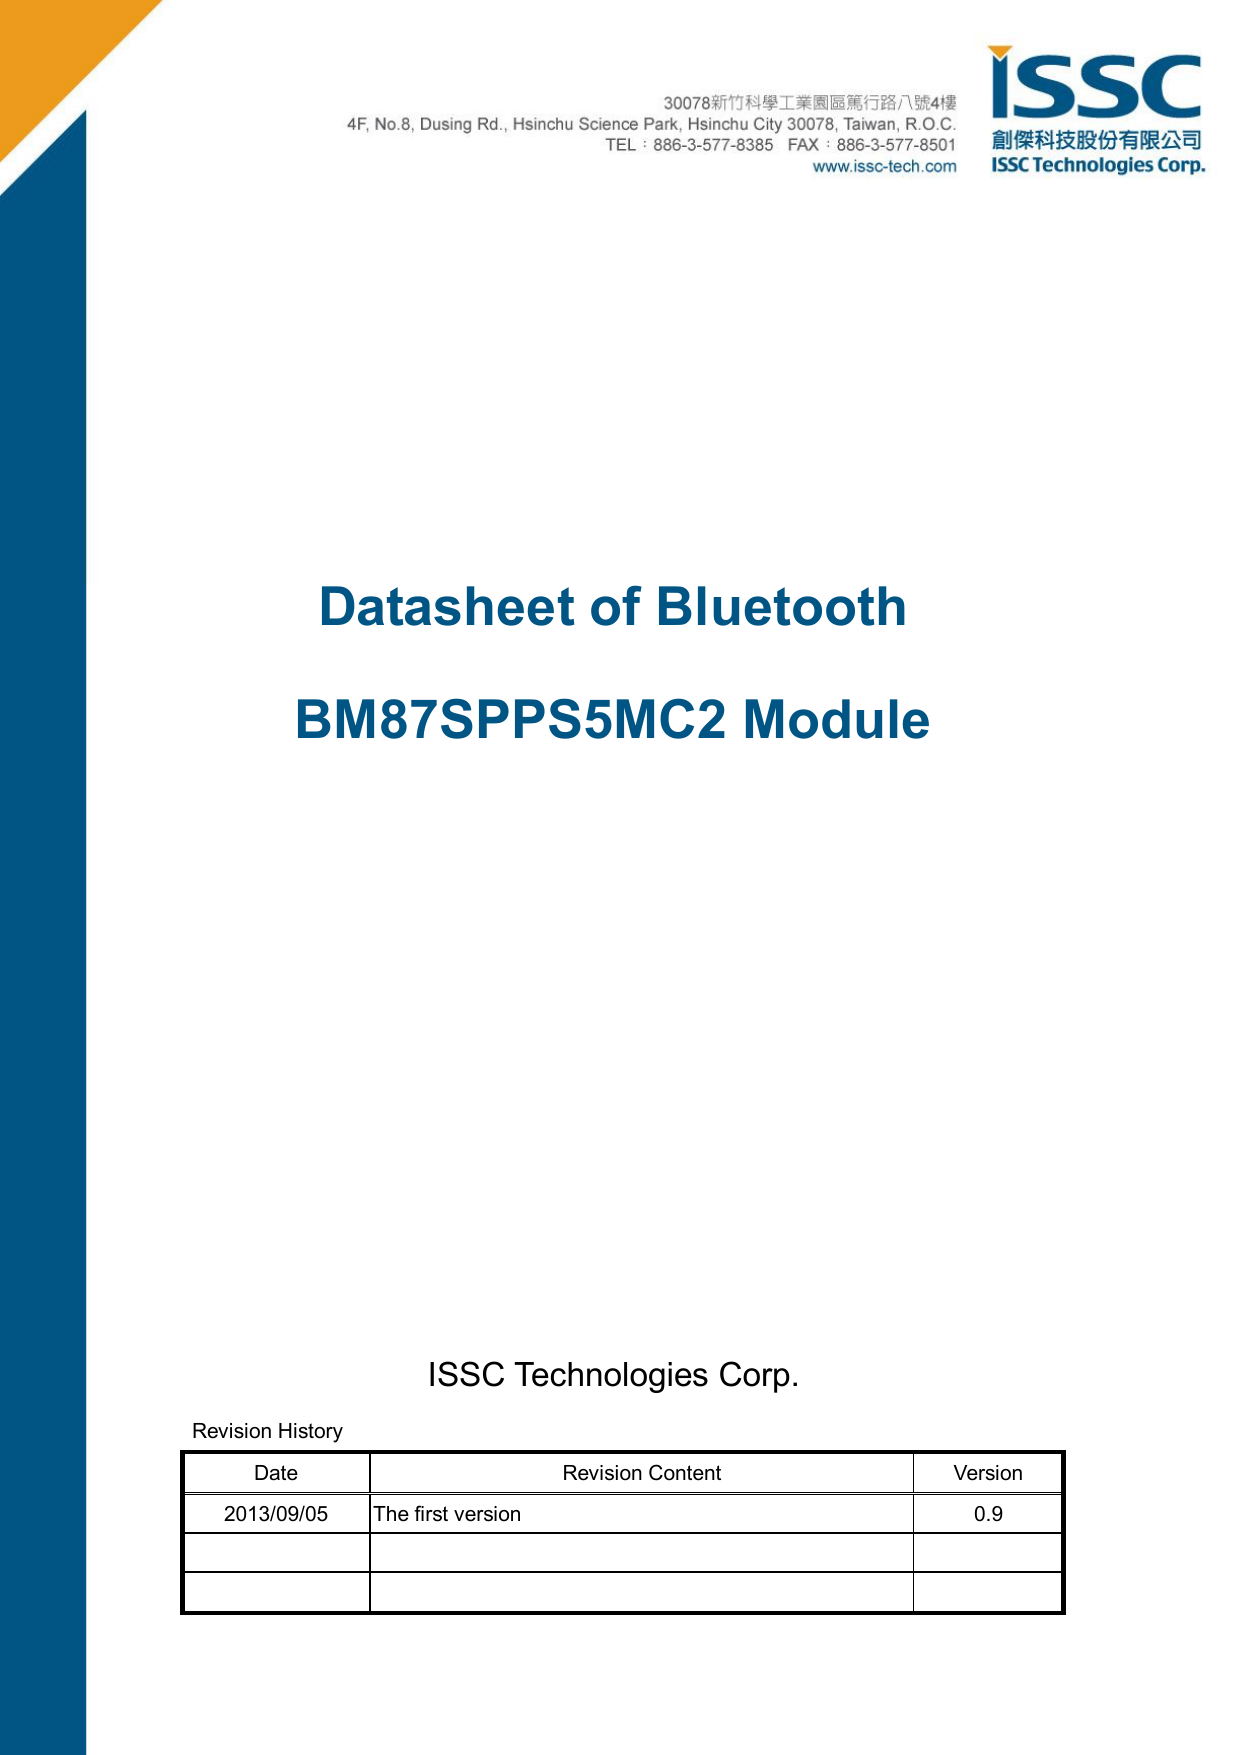  Datasheet of Bluetooth BM87SPPS5MC2 Module       ISSC Technologies Corp. Revision History Date  Revision Content  Version 2013/09/05  The first version  0.9           